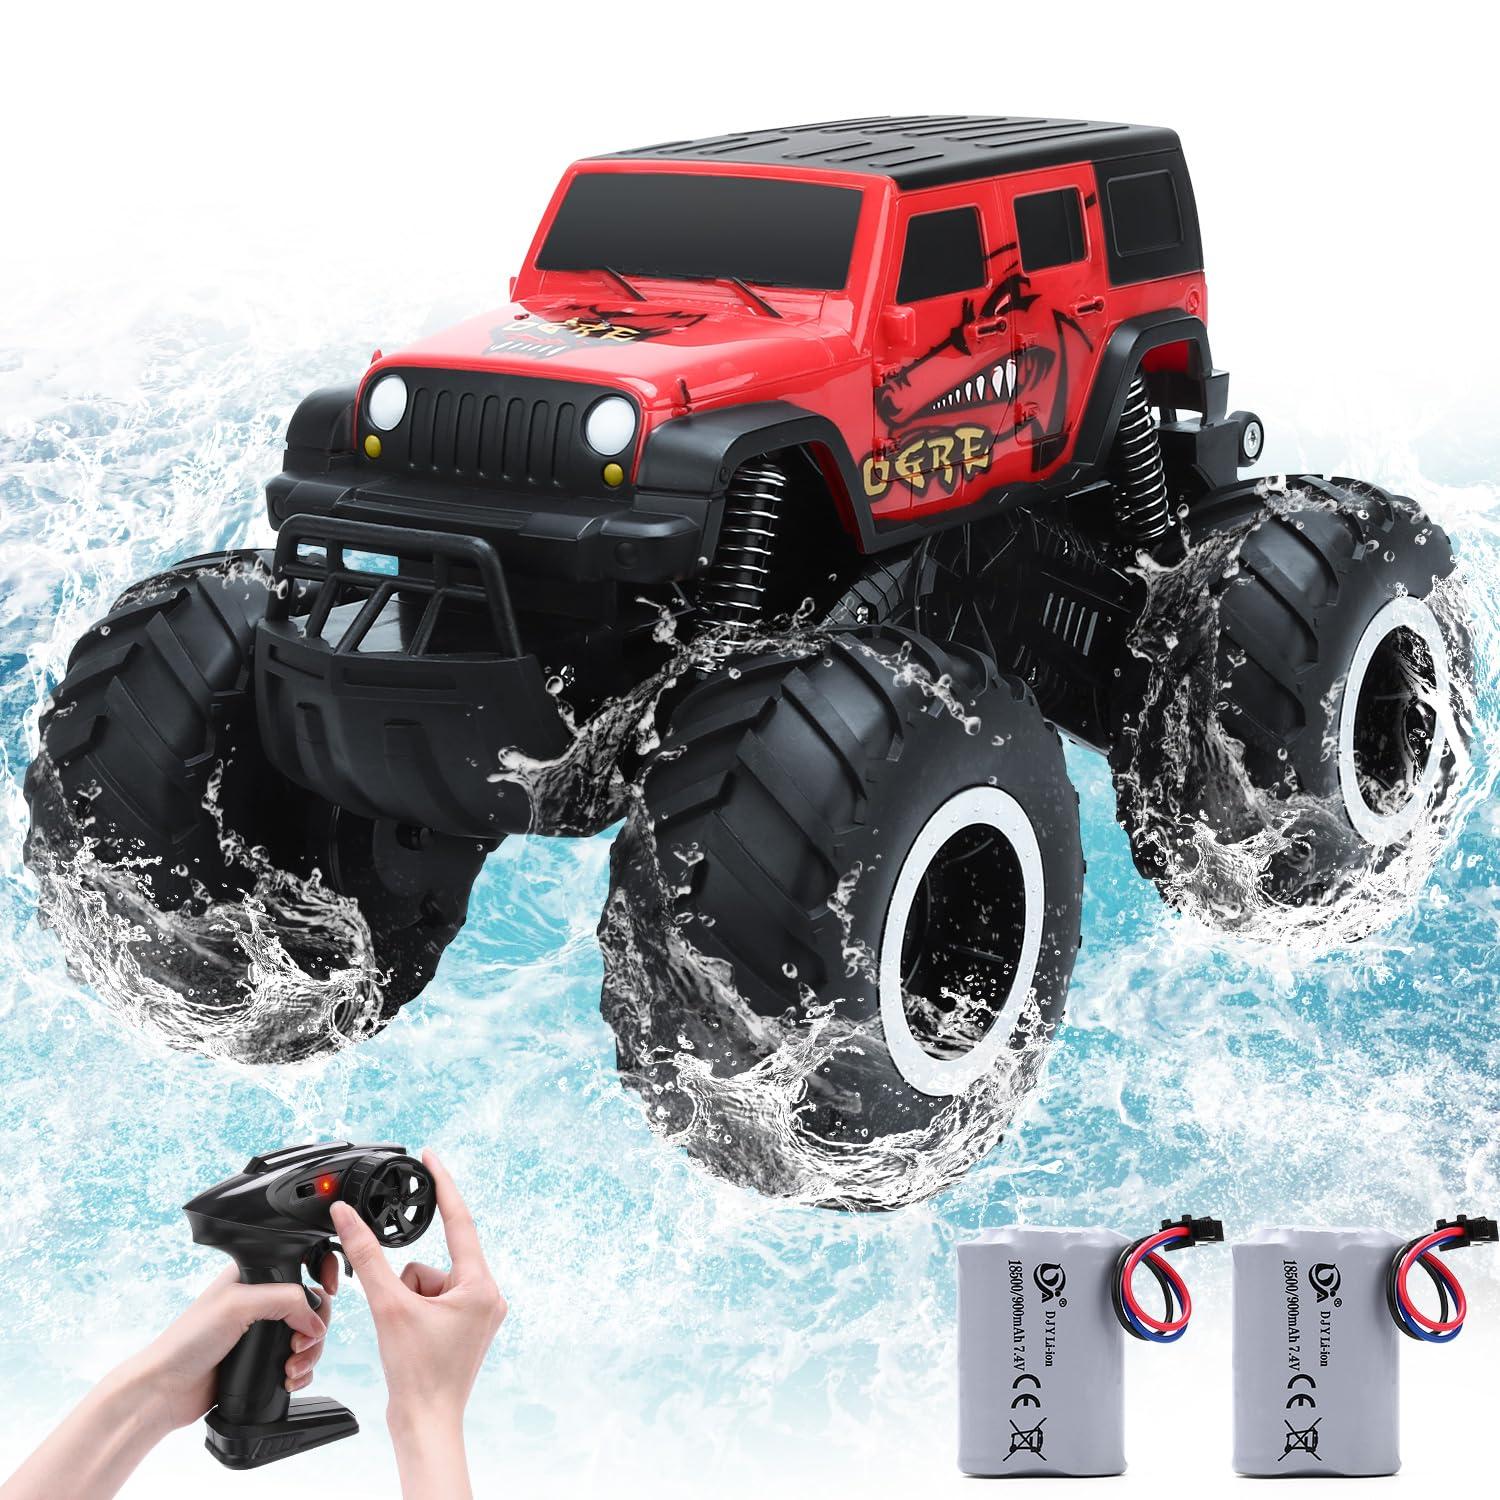 Remote Control Jeep 4X4: Off-road capabilities and navigating through difficult terrains